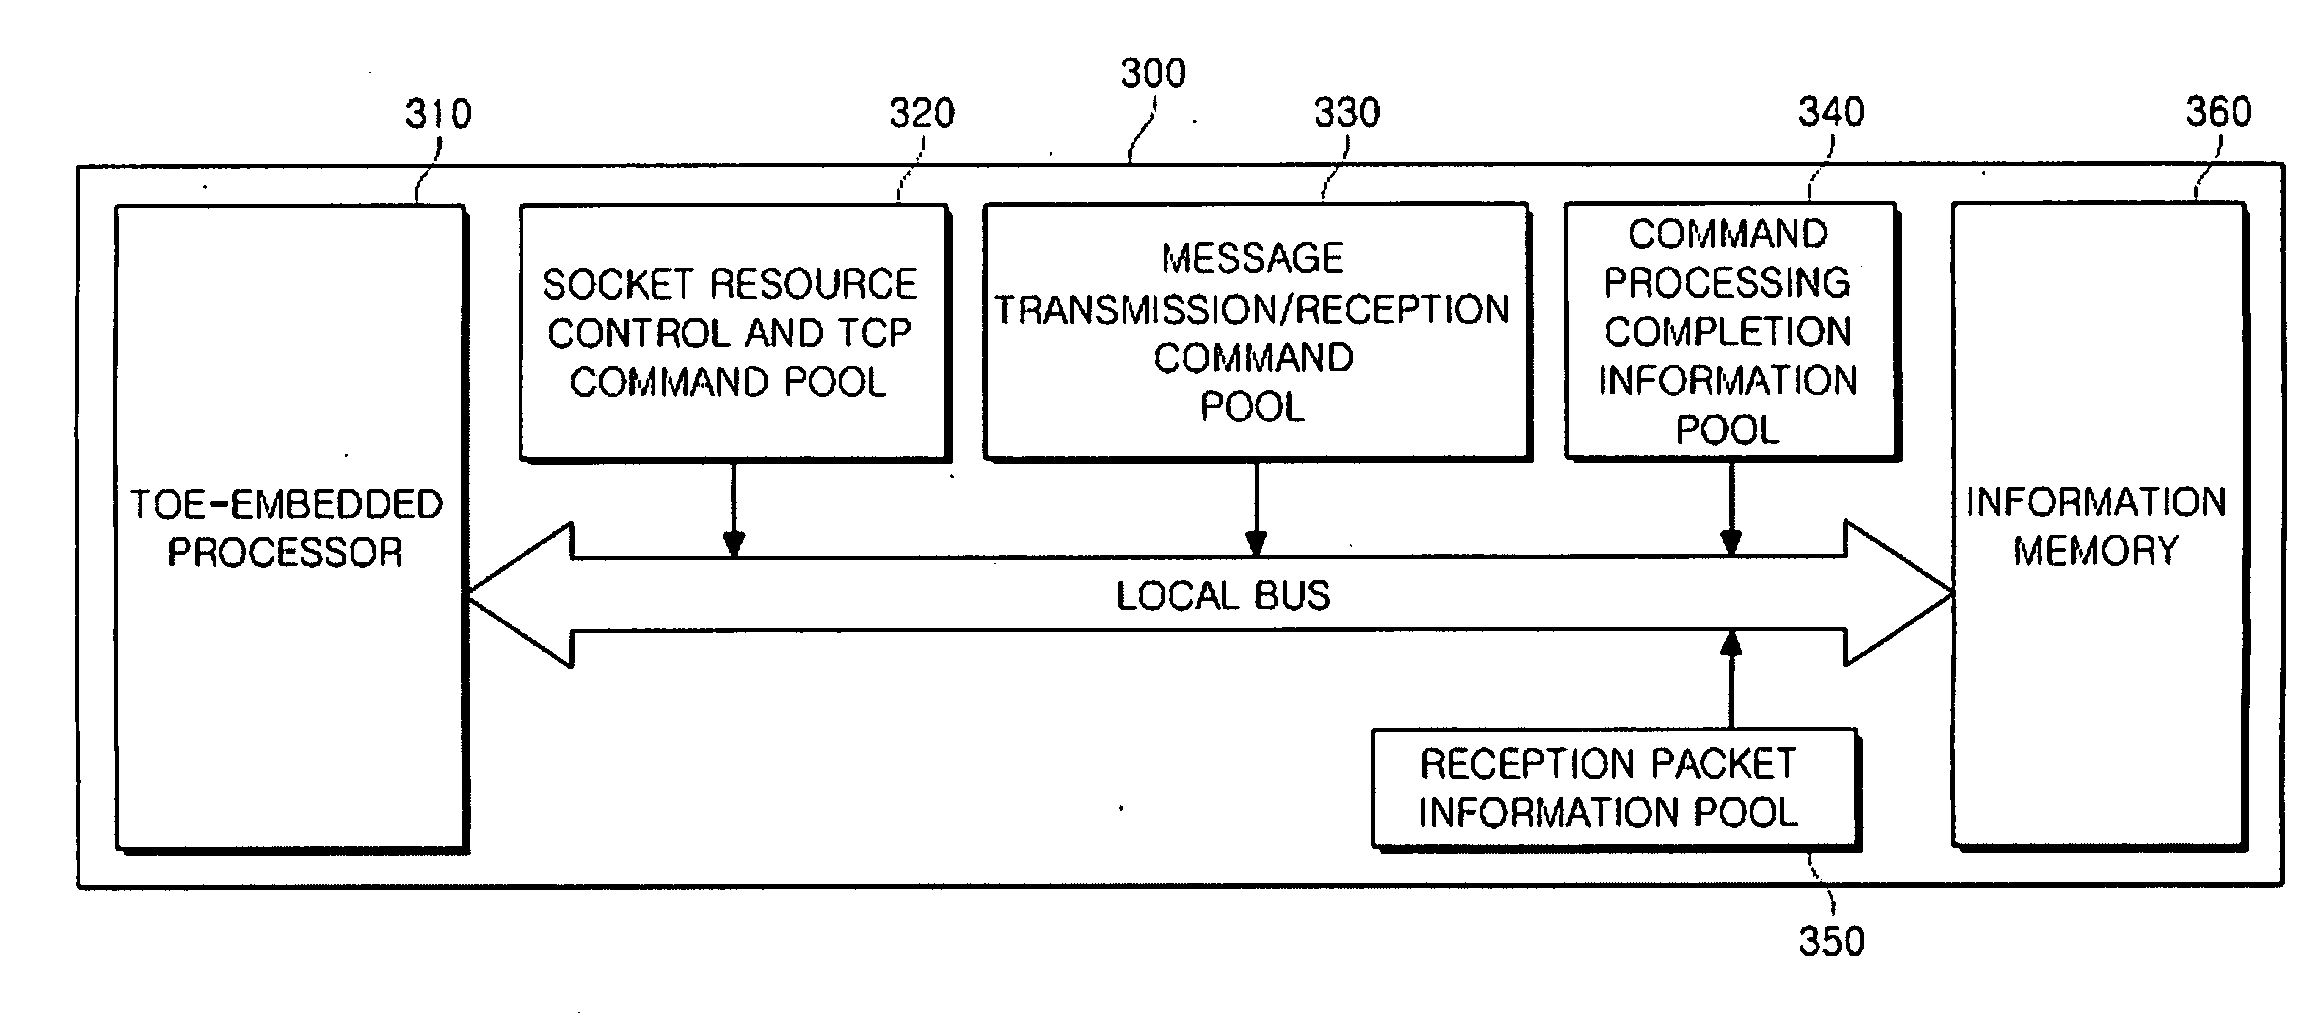 TCP offload engine apparatus and method for system call processing for static file transmission